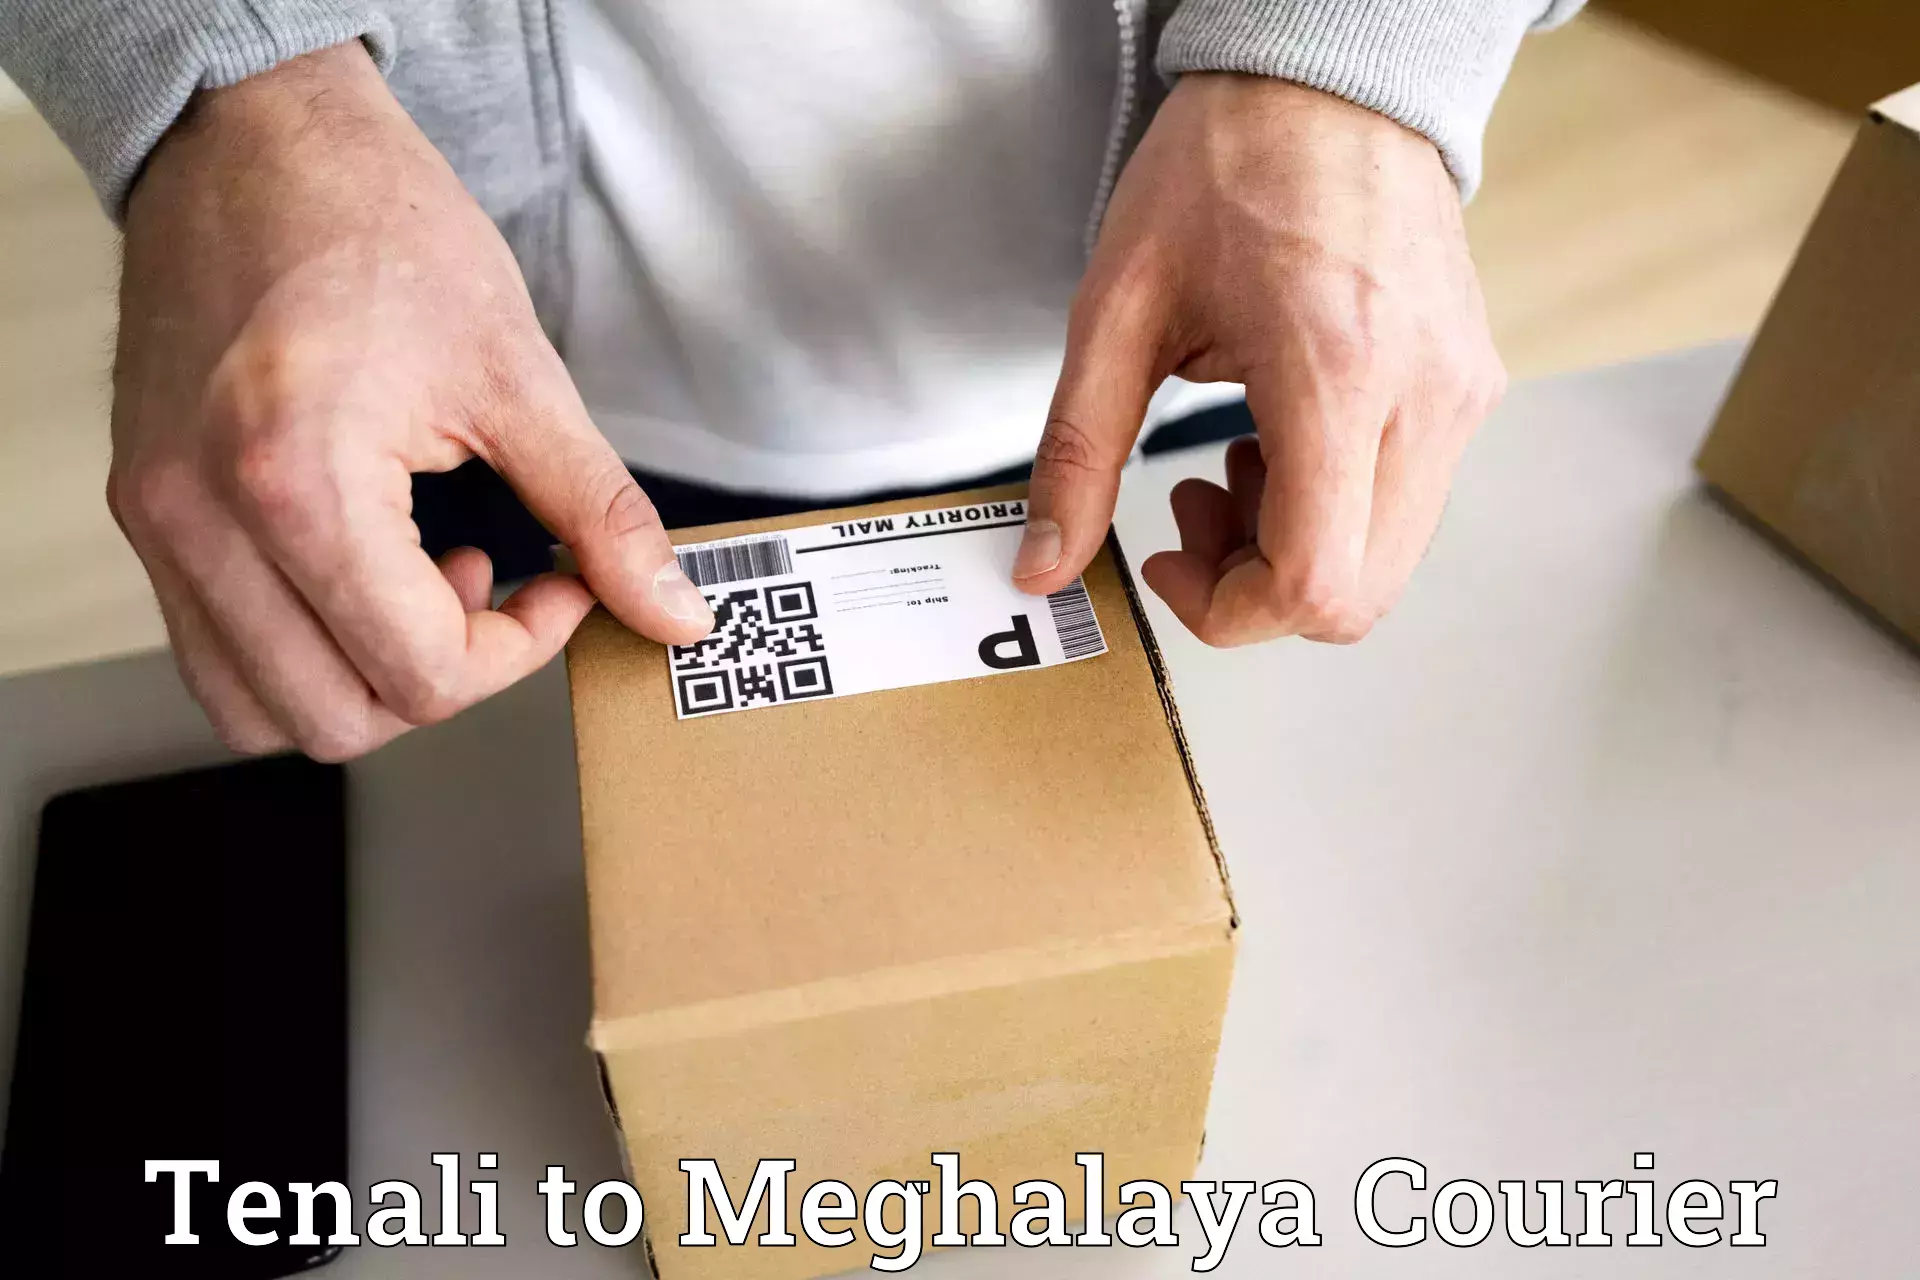 Quality courier services in Tenali to Williamnagar